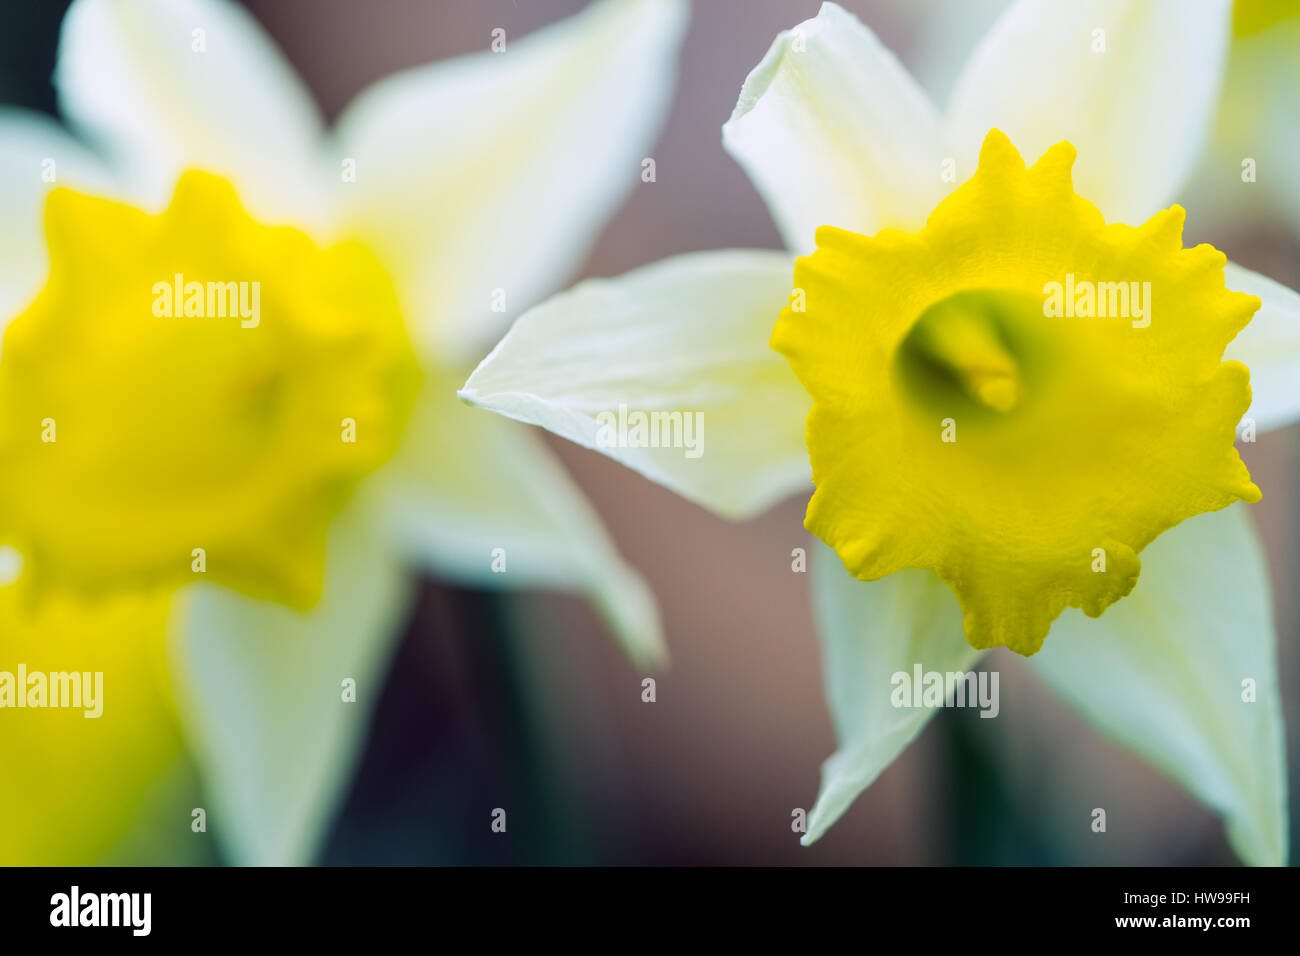 Spring English England Daffodil Narcissus yellow and white stock image daffodils background Stock Photo